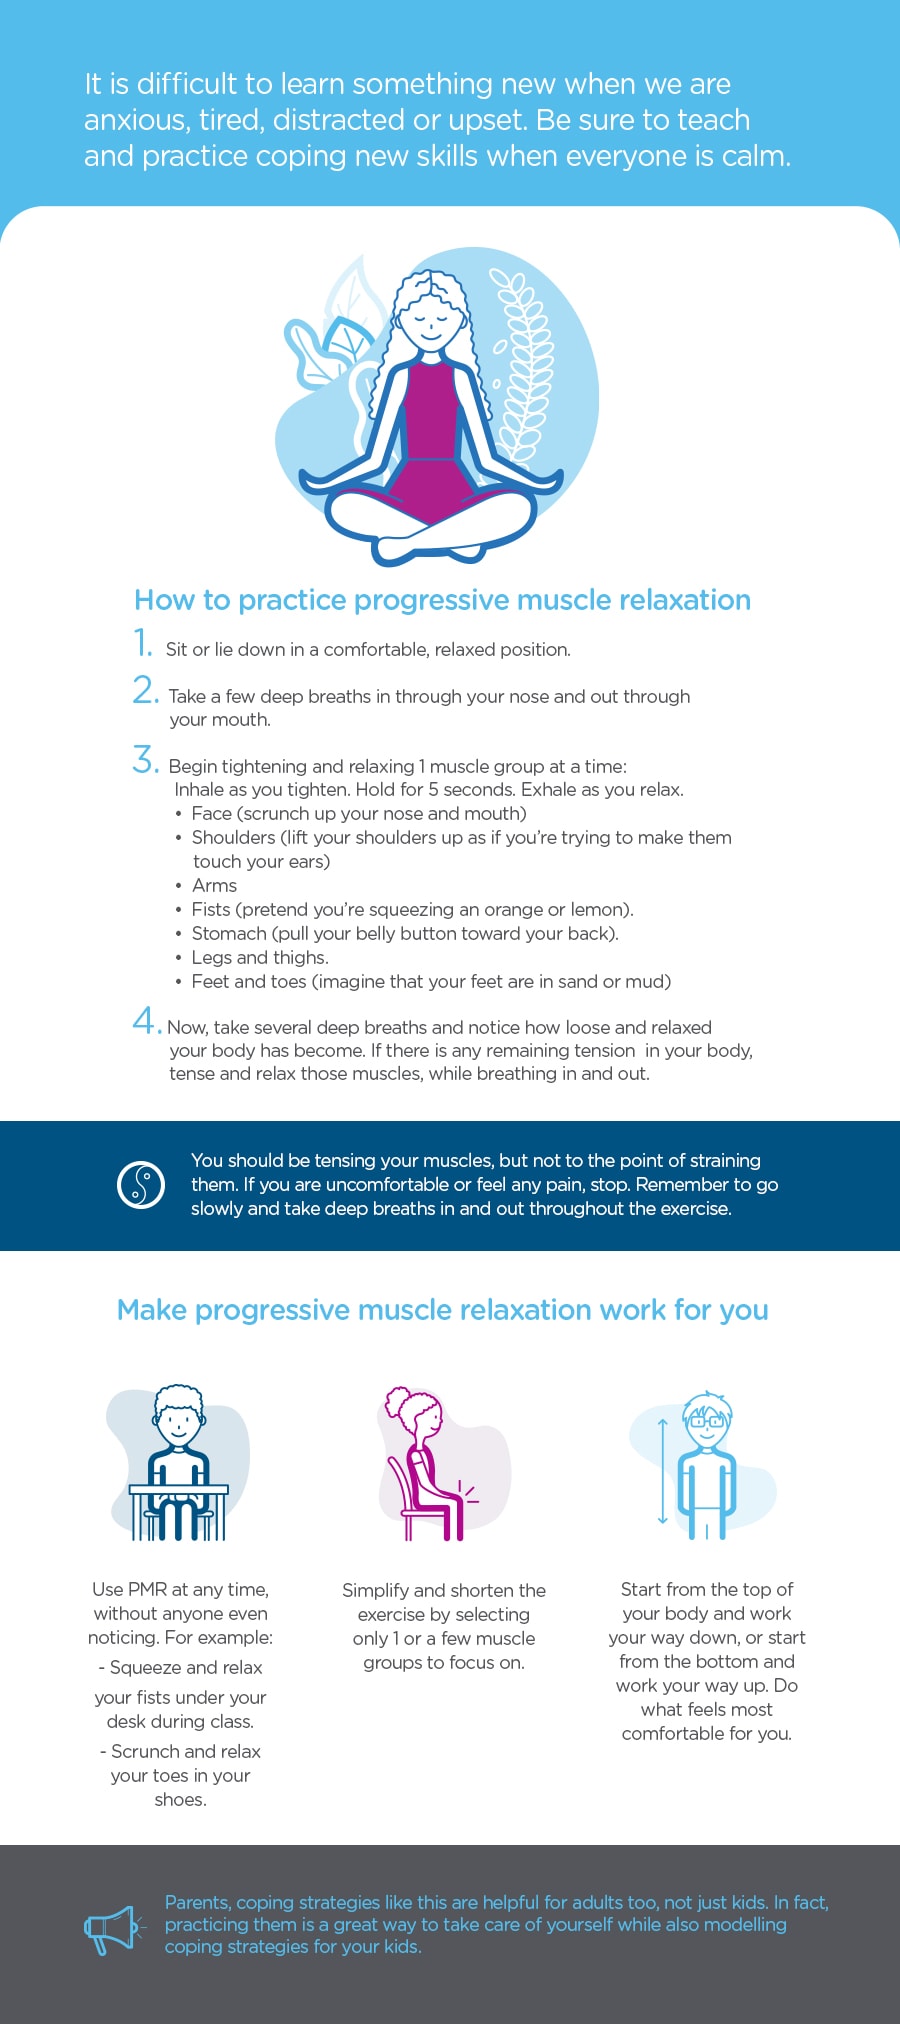 Benefits of Progressive Muscle Relaxation (PMR)